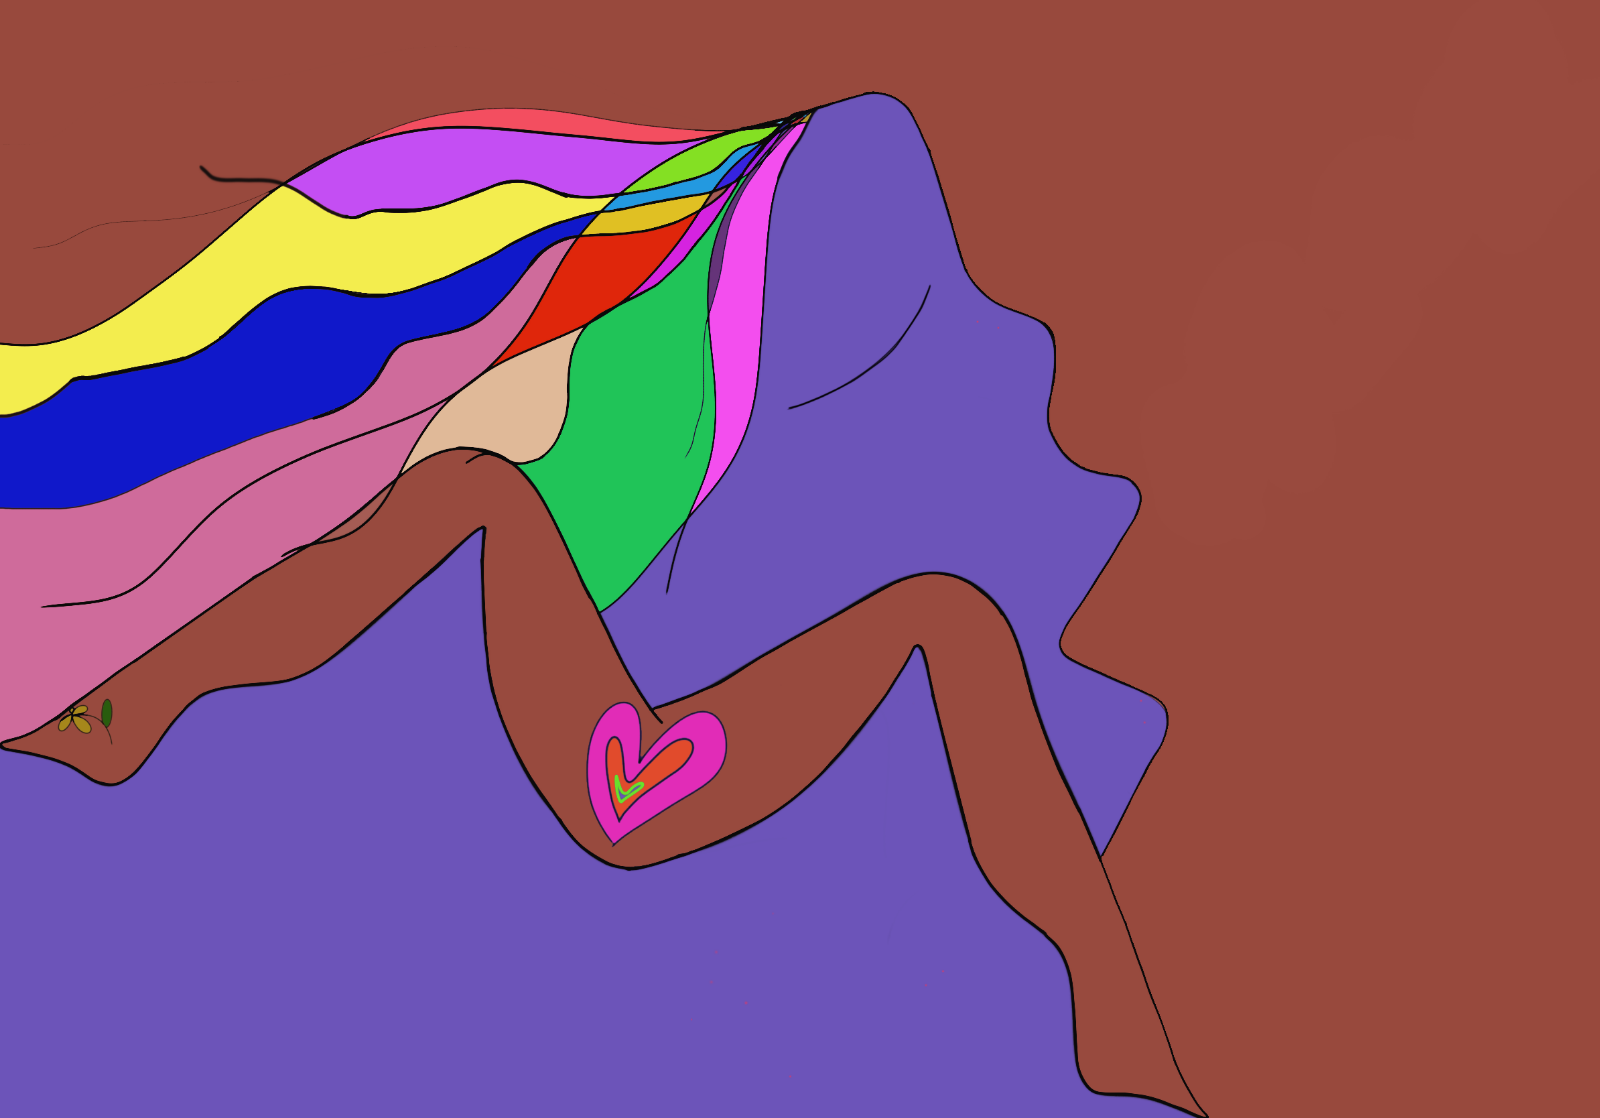 Image consists of two legs stretched apart showing a heart shaped opening, against a big woman face with closed eyes and rainbow hair flowing away.